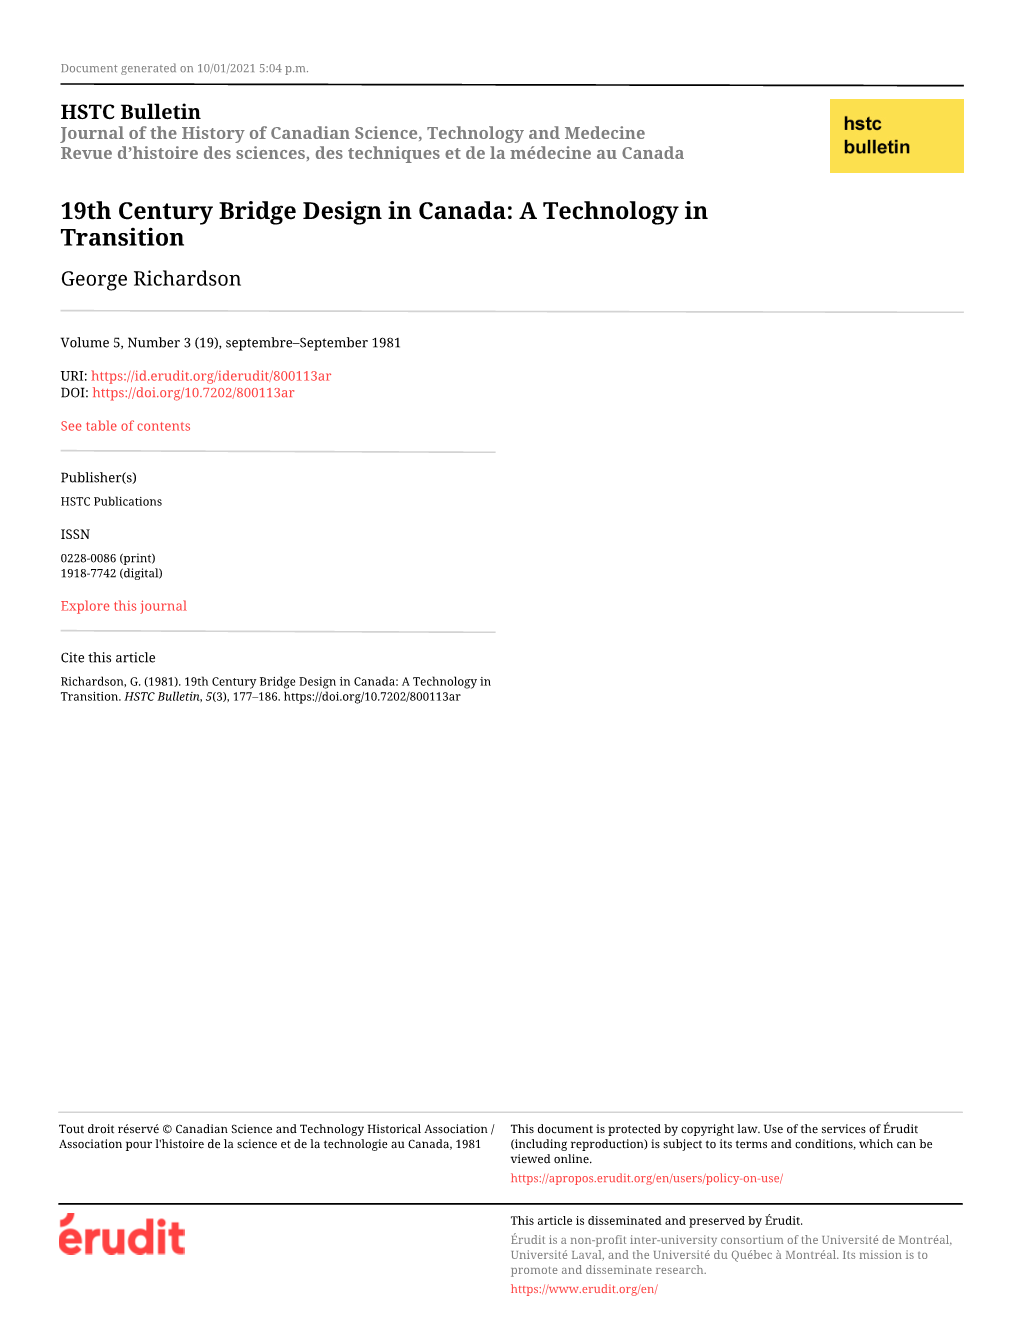 19Th Century Bridge Design in Canada: a Technology in Transition George Richardson